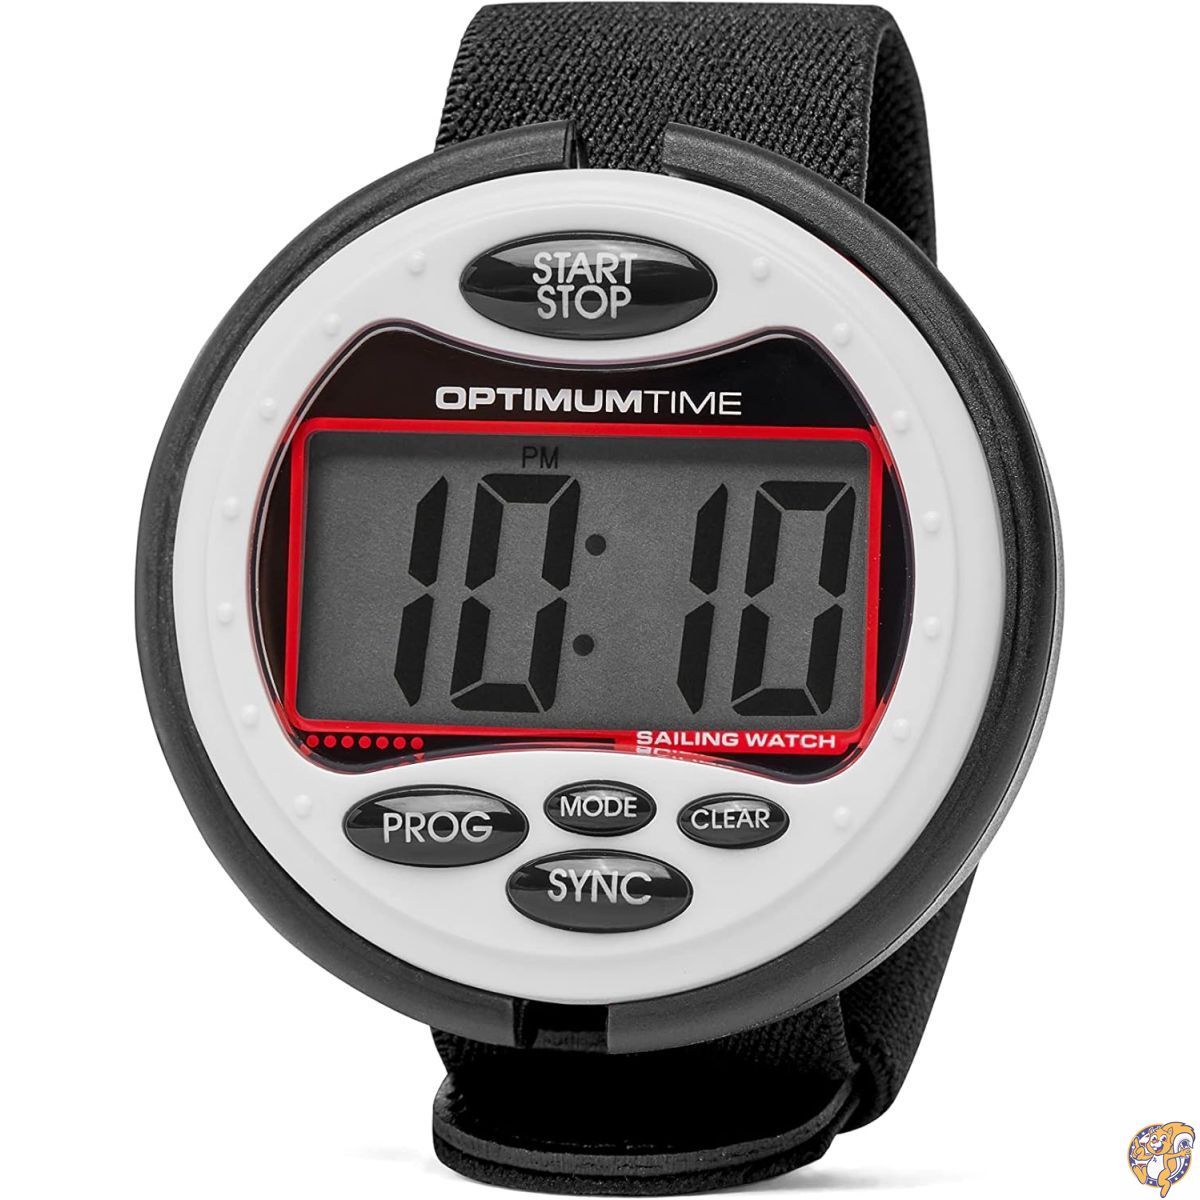 Optimum Time OS 310 WHITE same as 315 Sailing Watch Series 3 NEW for 2013